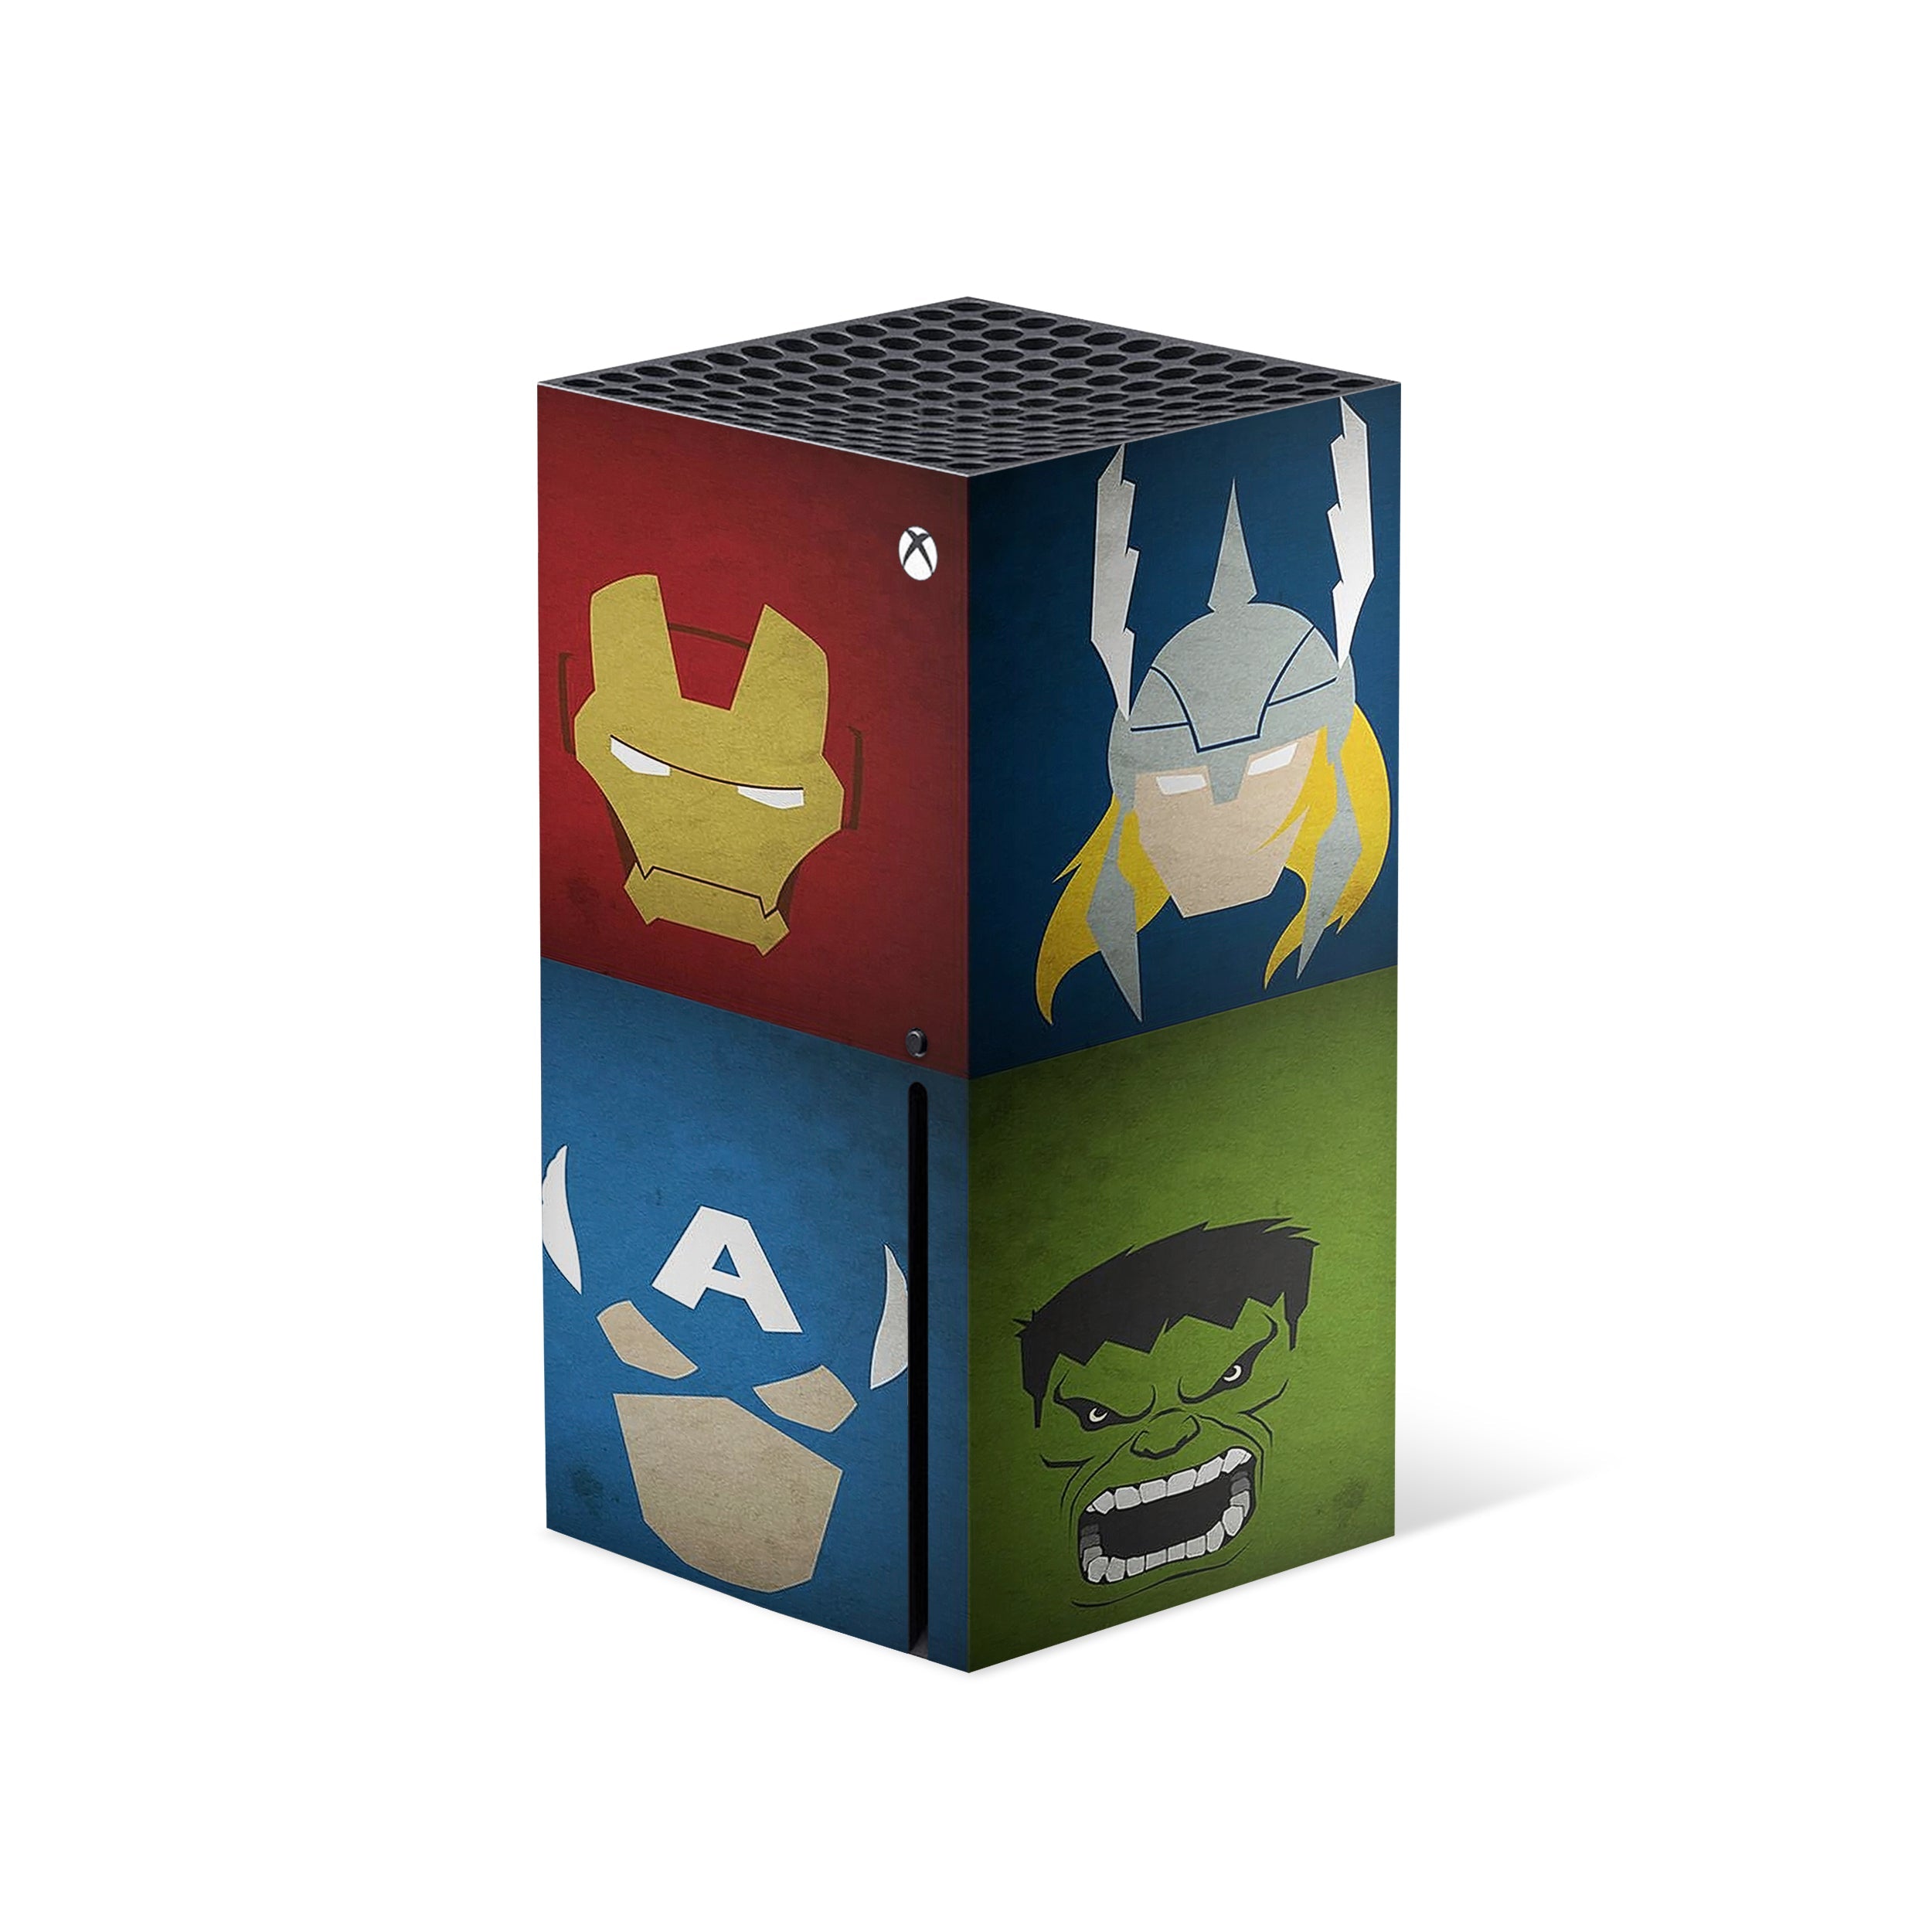 A video game skin featuring a Marvel Avengers design for the Xbox Series X.